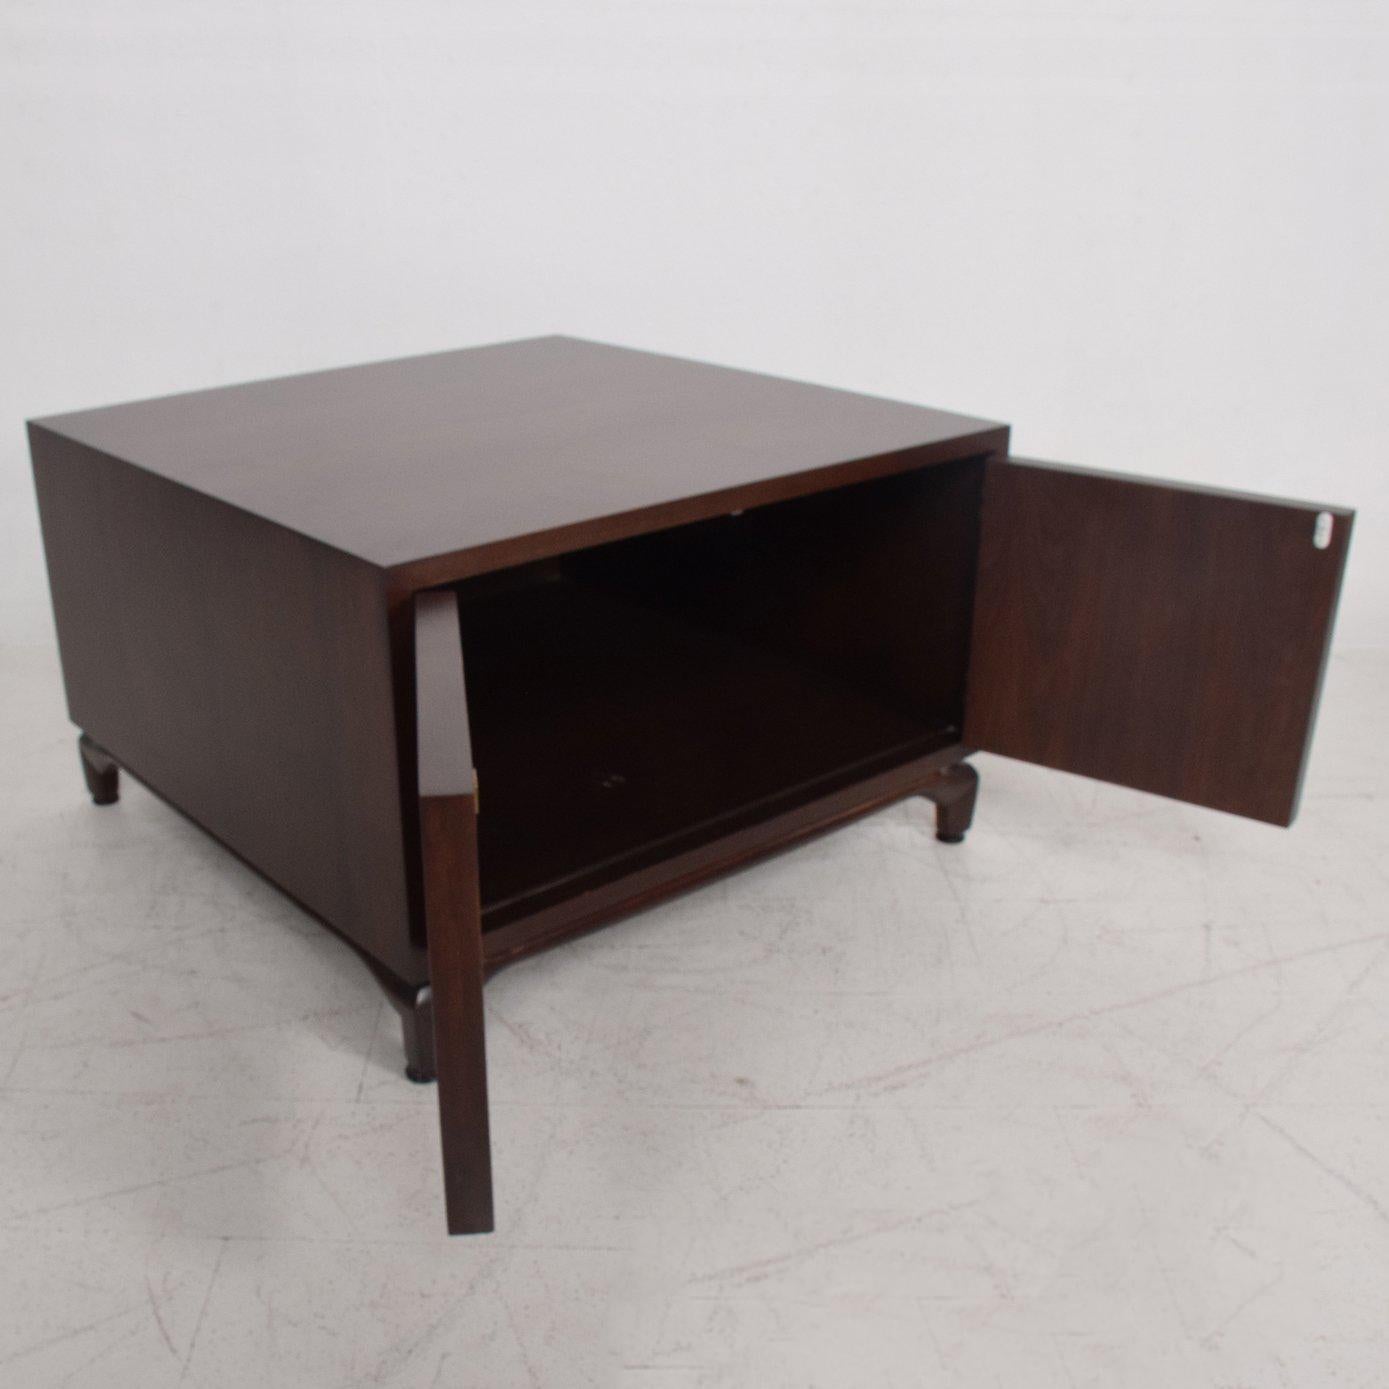 For your consideration a pair of side tables or cabinets with two doors (push on magnetic lock system) with decorative ornamentation on front doors. 

Beautiful sculptural solid walnut wood base. 

USA circa 1960s. Unmarked. Attributed to Cal